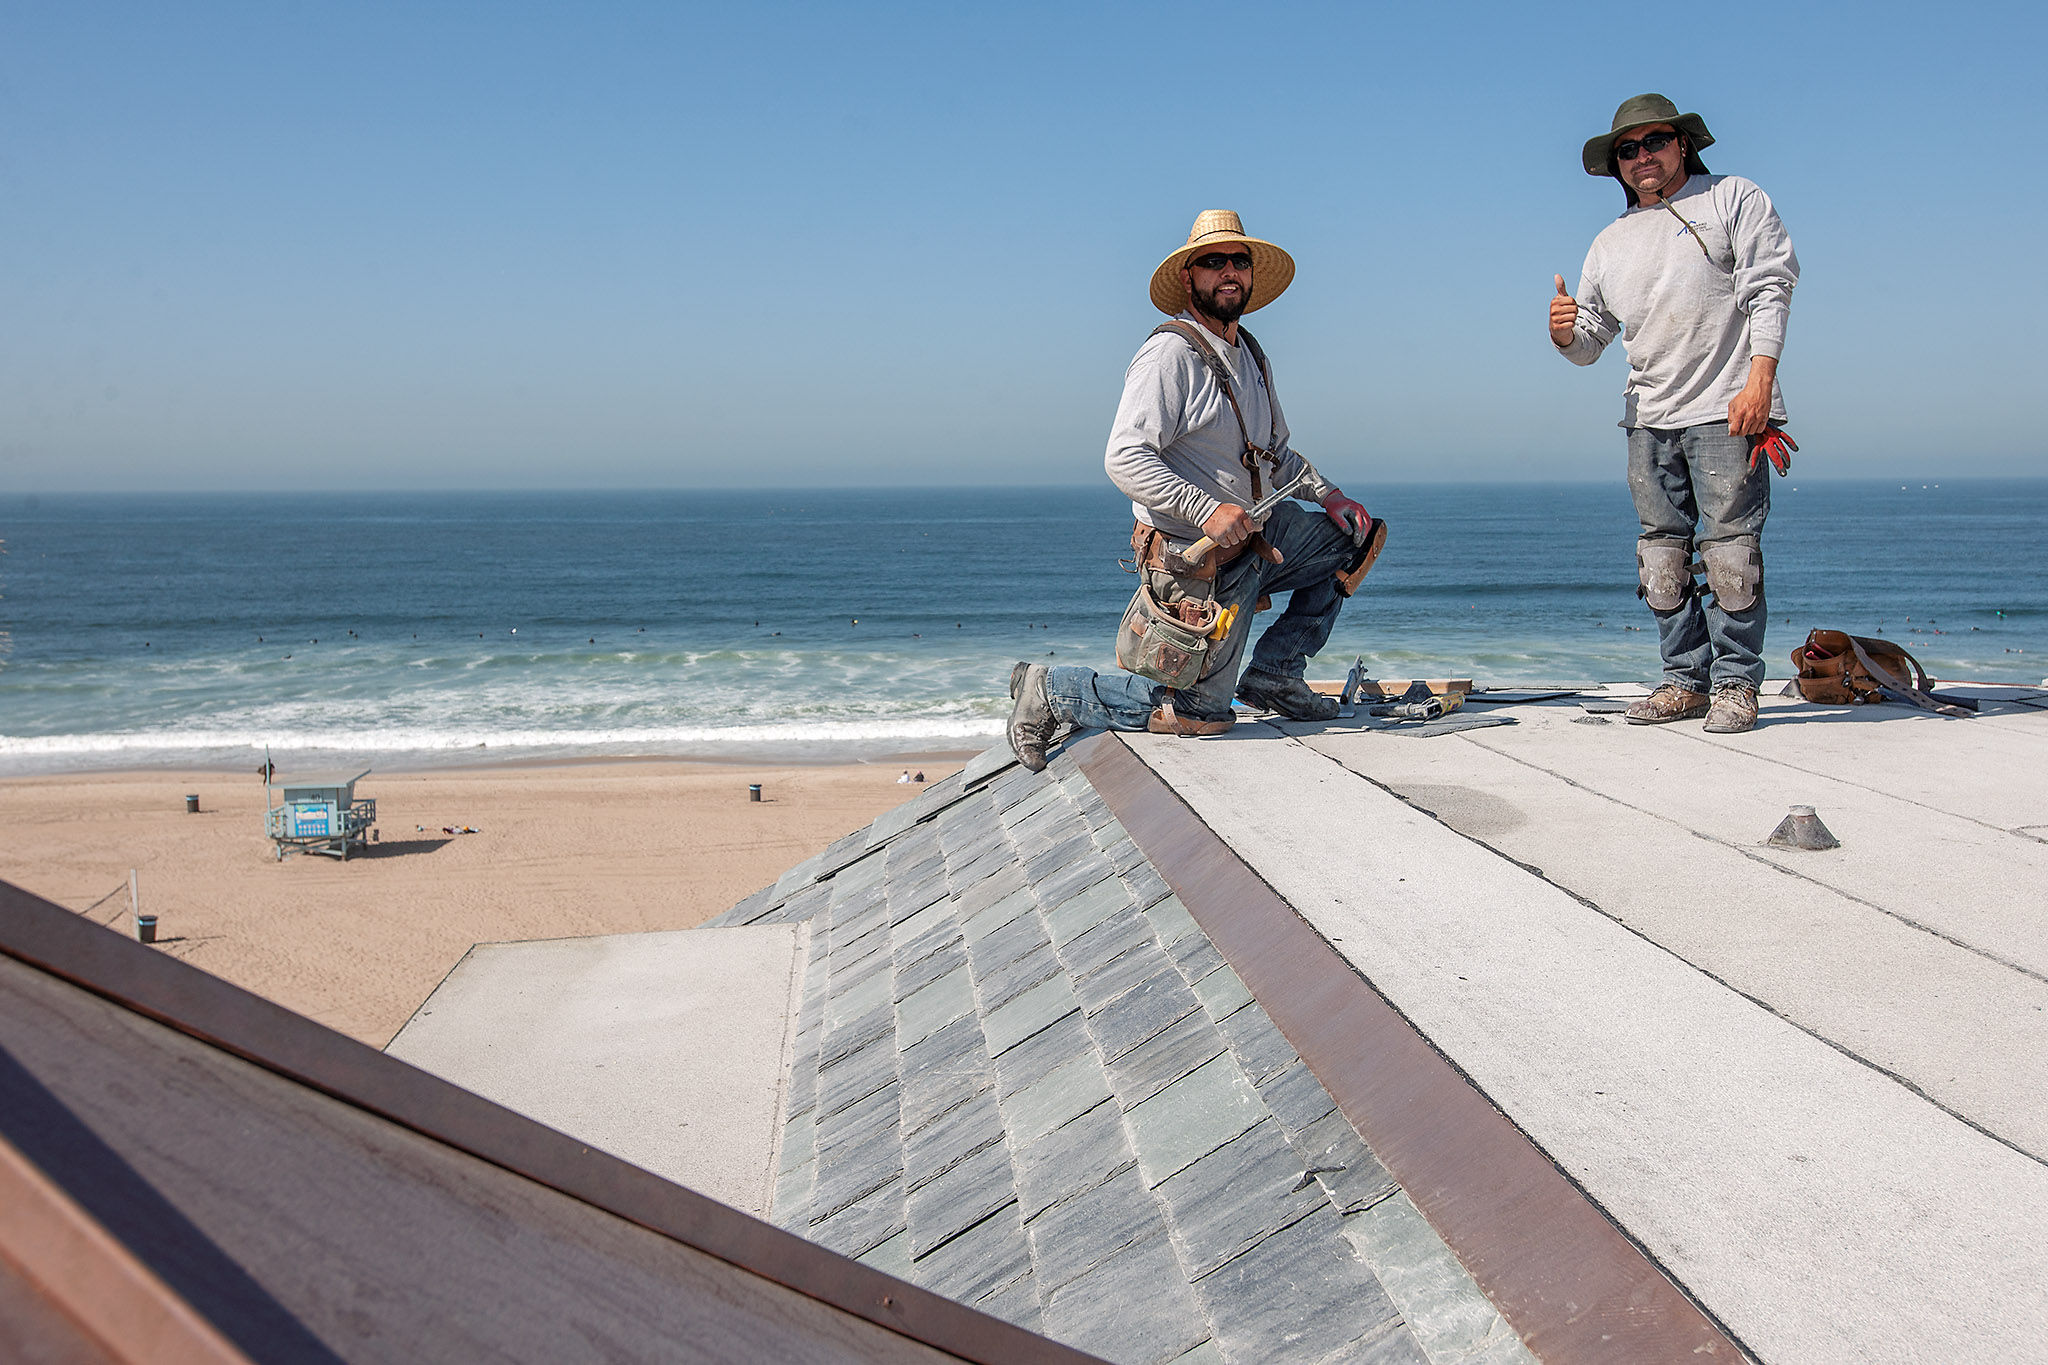 Workers on the flat roof section, Manhattan Beach, California